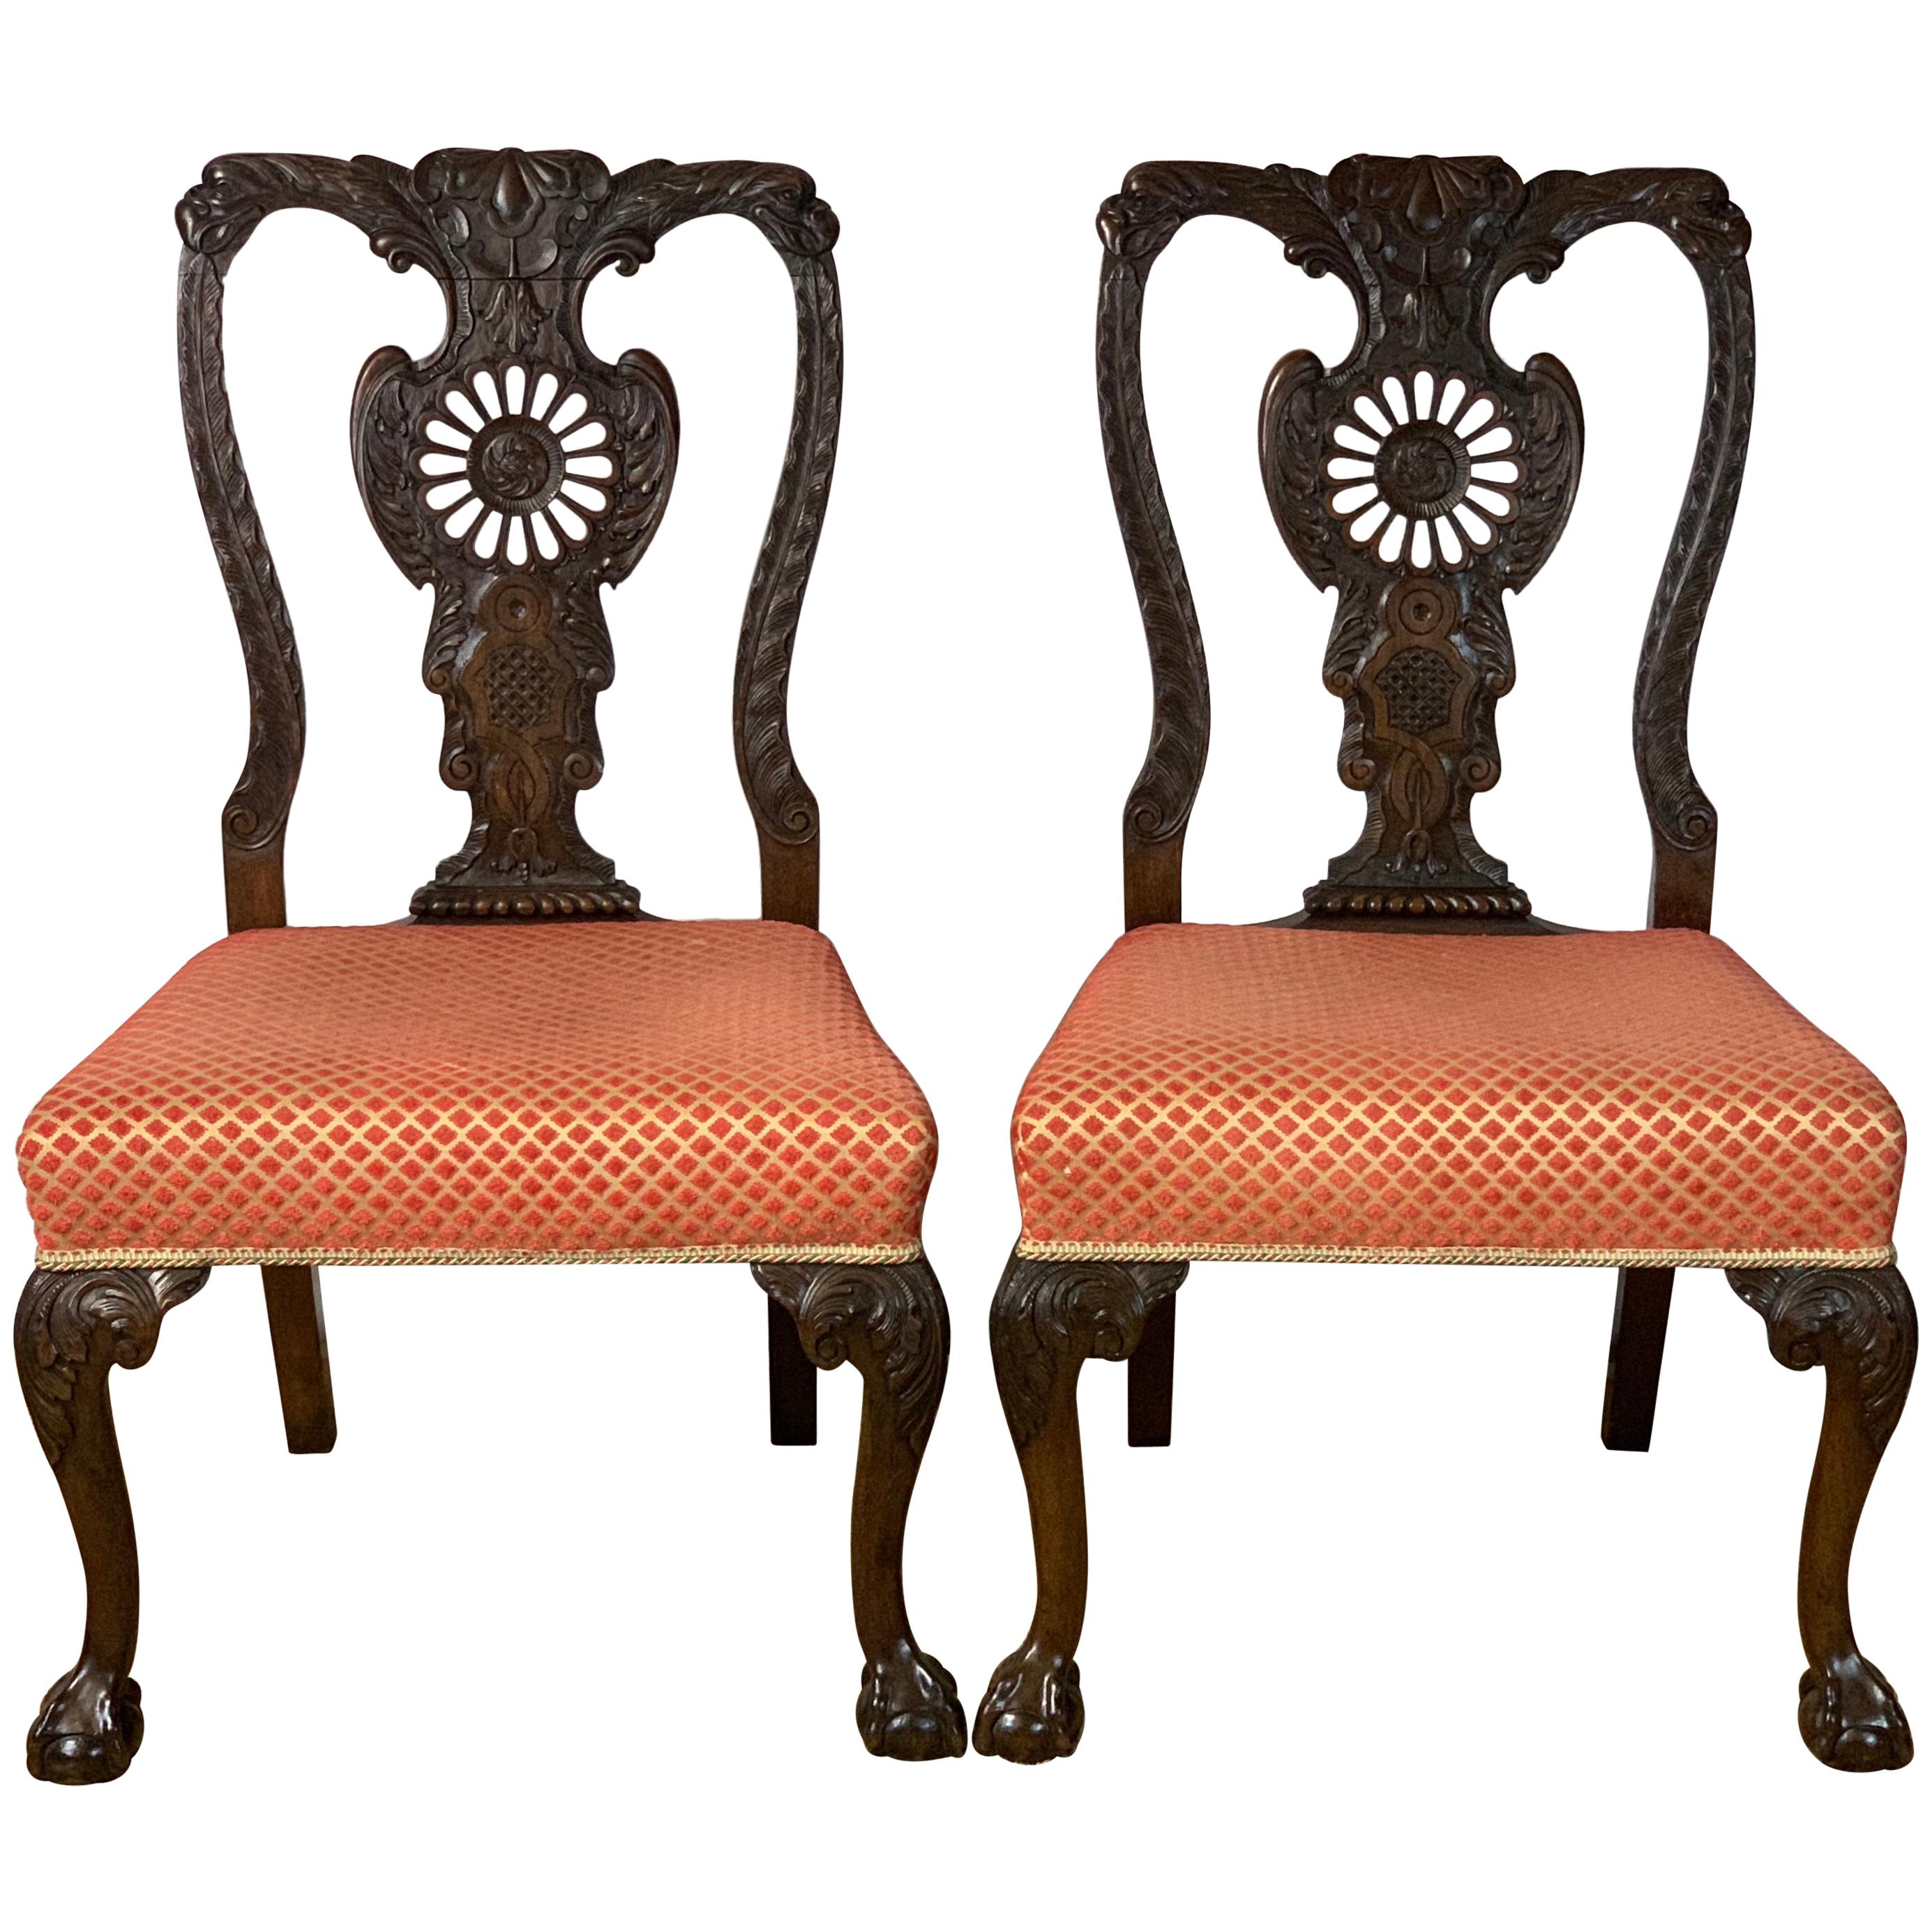 Mid-19th Century Chippendale Style Carved Mahogany Side Chairs